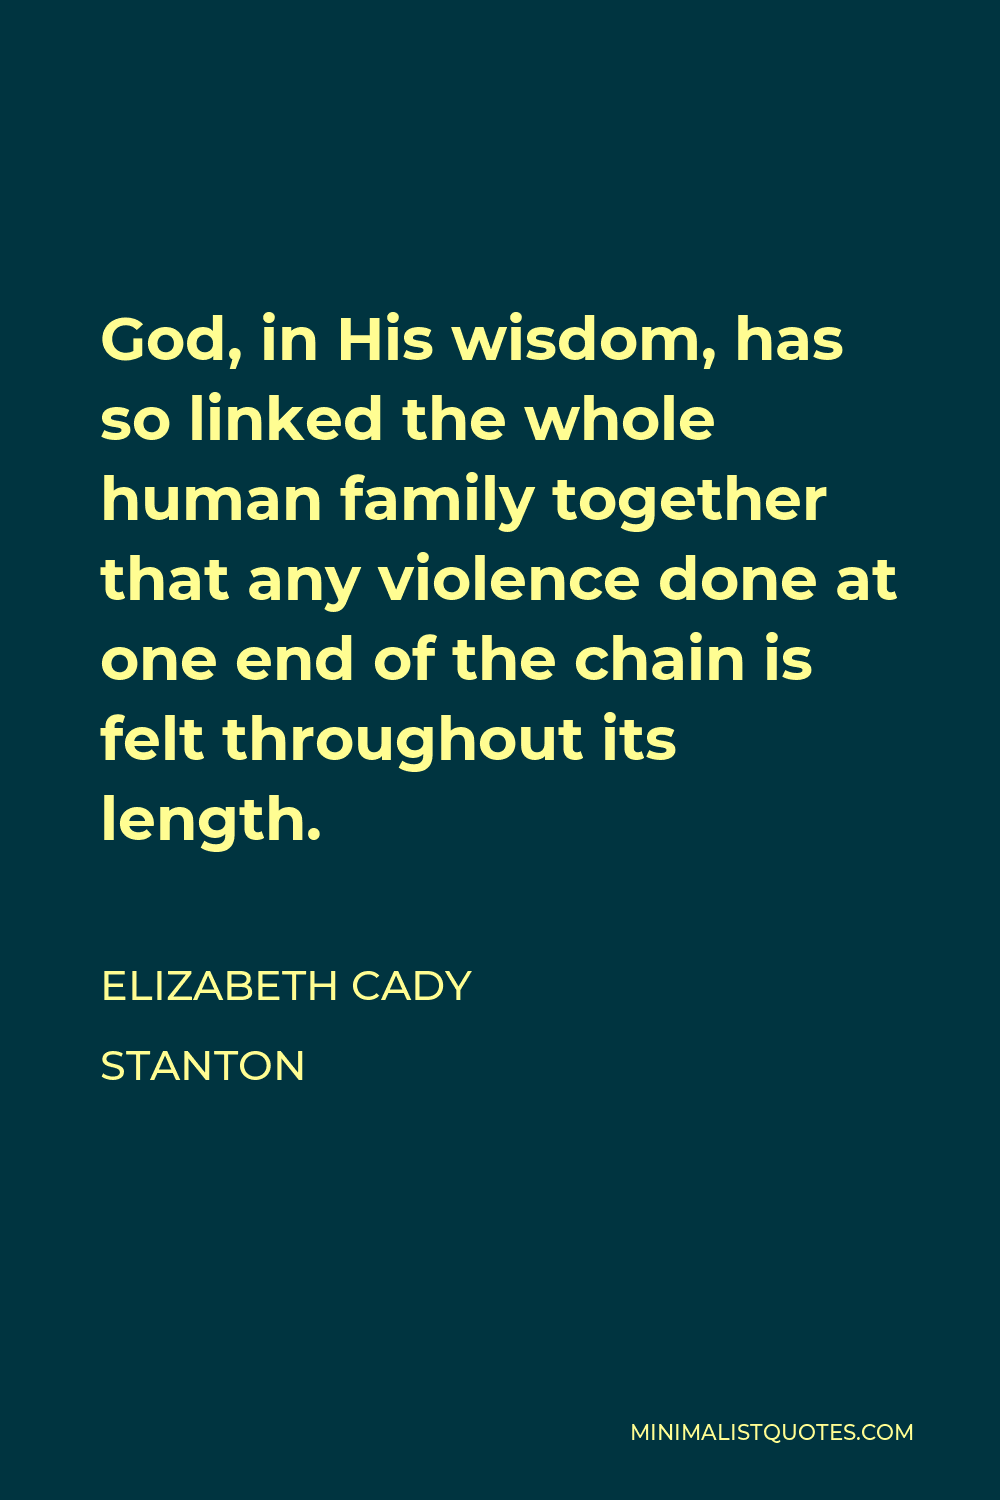 Elizabeth Cady Stanton Quote - God, in His wisdom, has so linked the whole human family together that any violence done at one end of the chain is felt throughout its length.